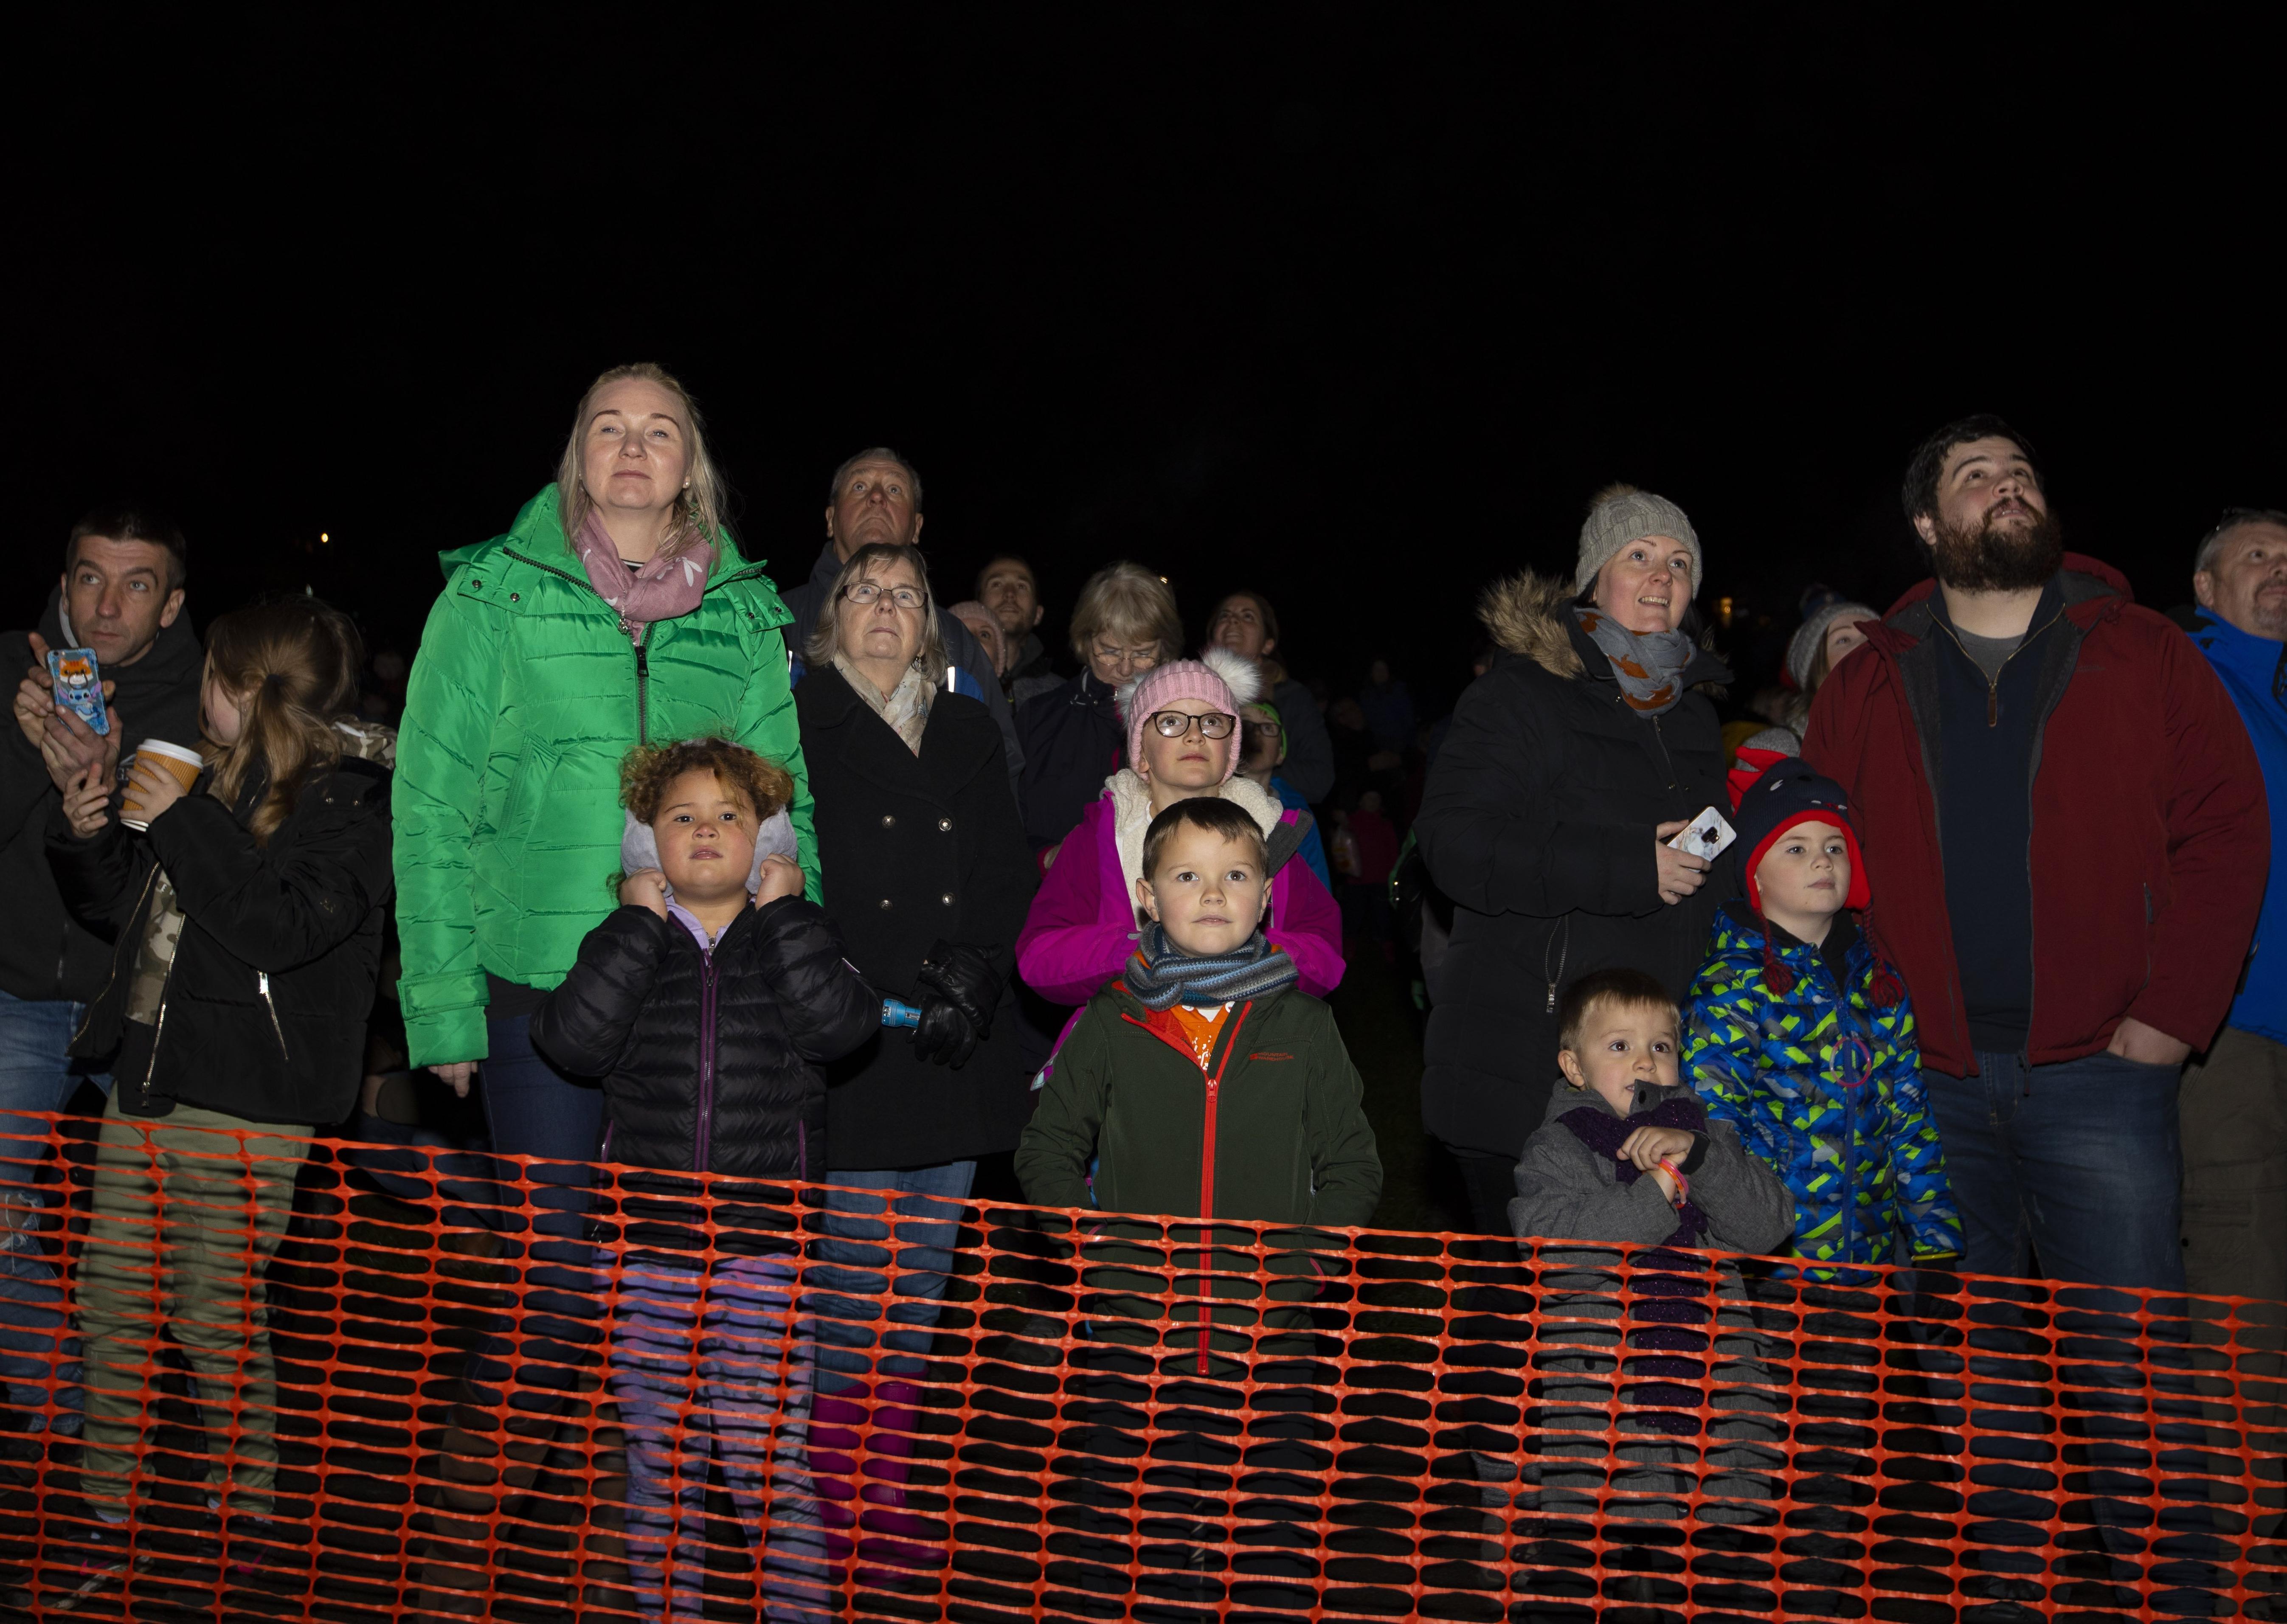 Fireworks display at Victoria Park, organised by Peebles and District Round Table.